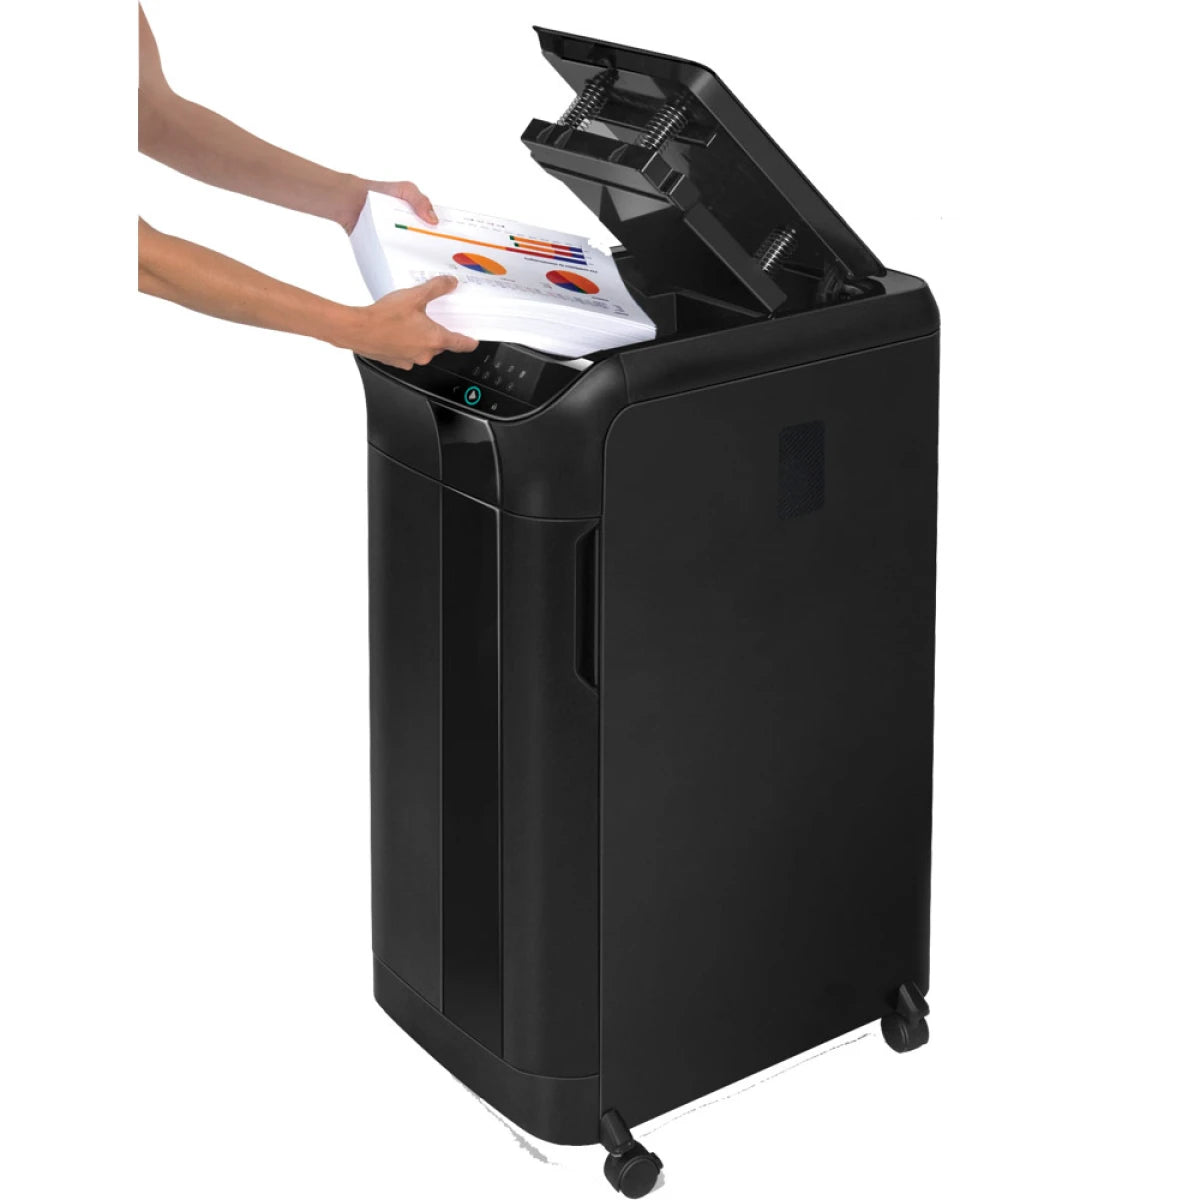 Fellowes AutoMax  Auto Feed Shreds up to 550 sheets - Black